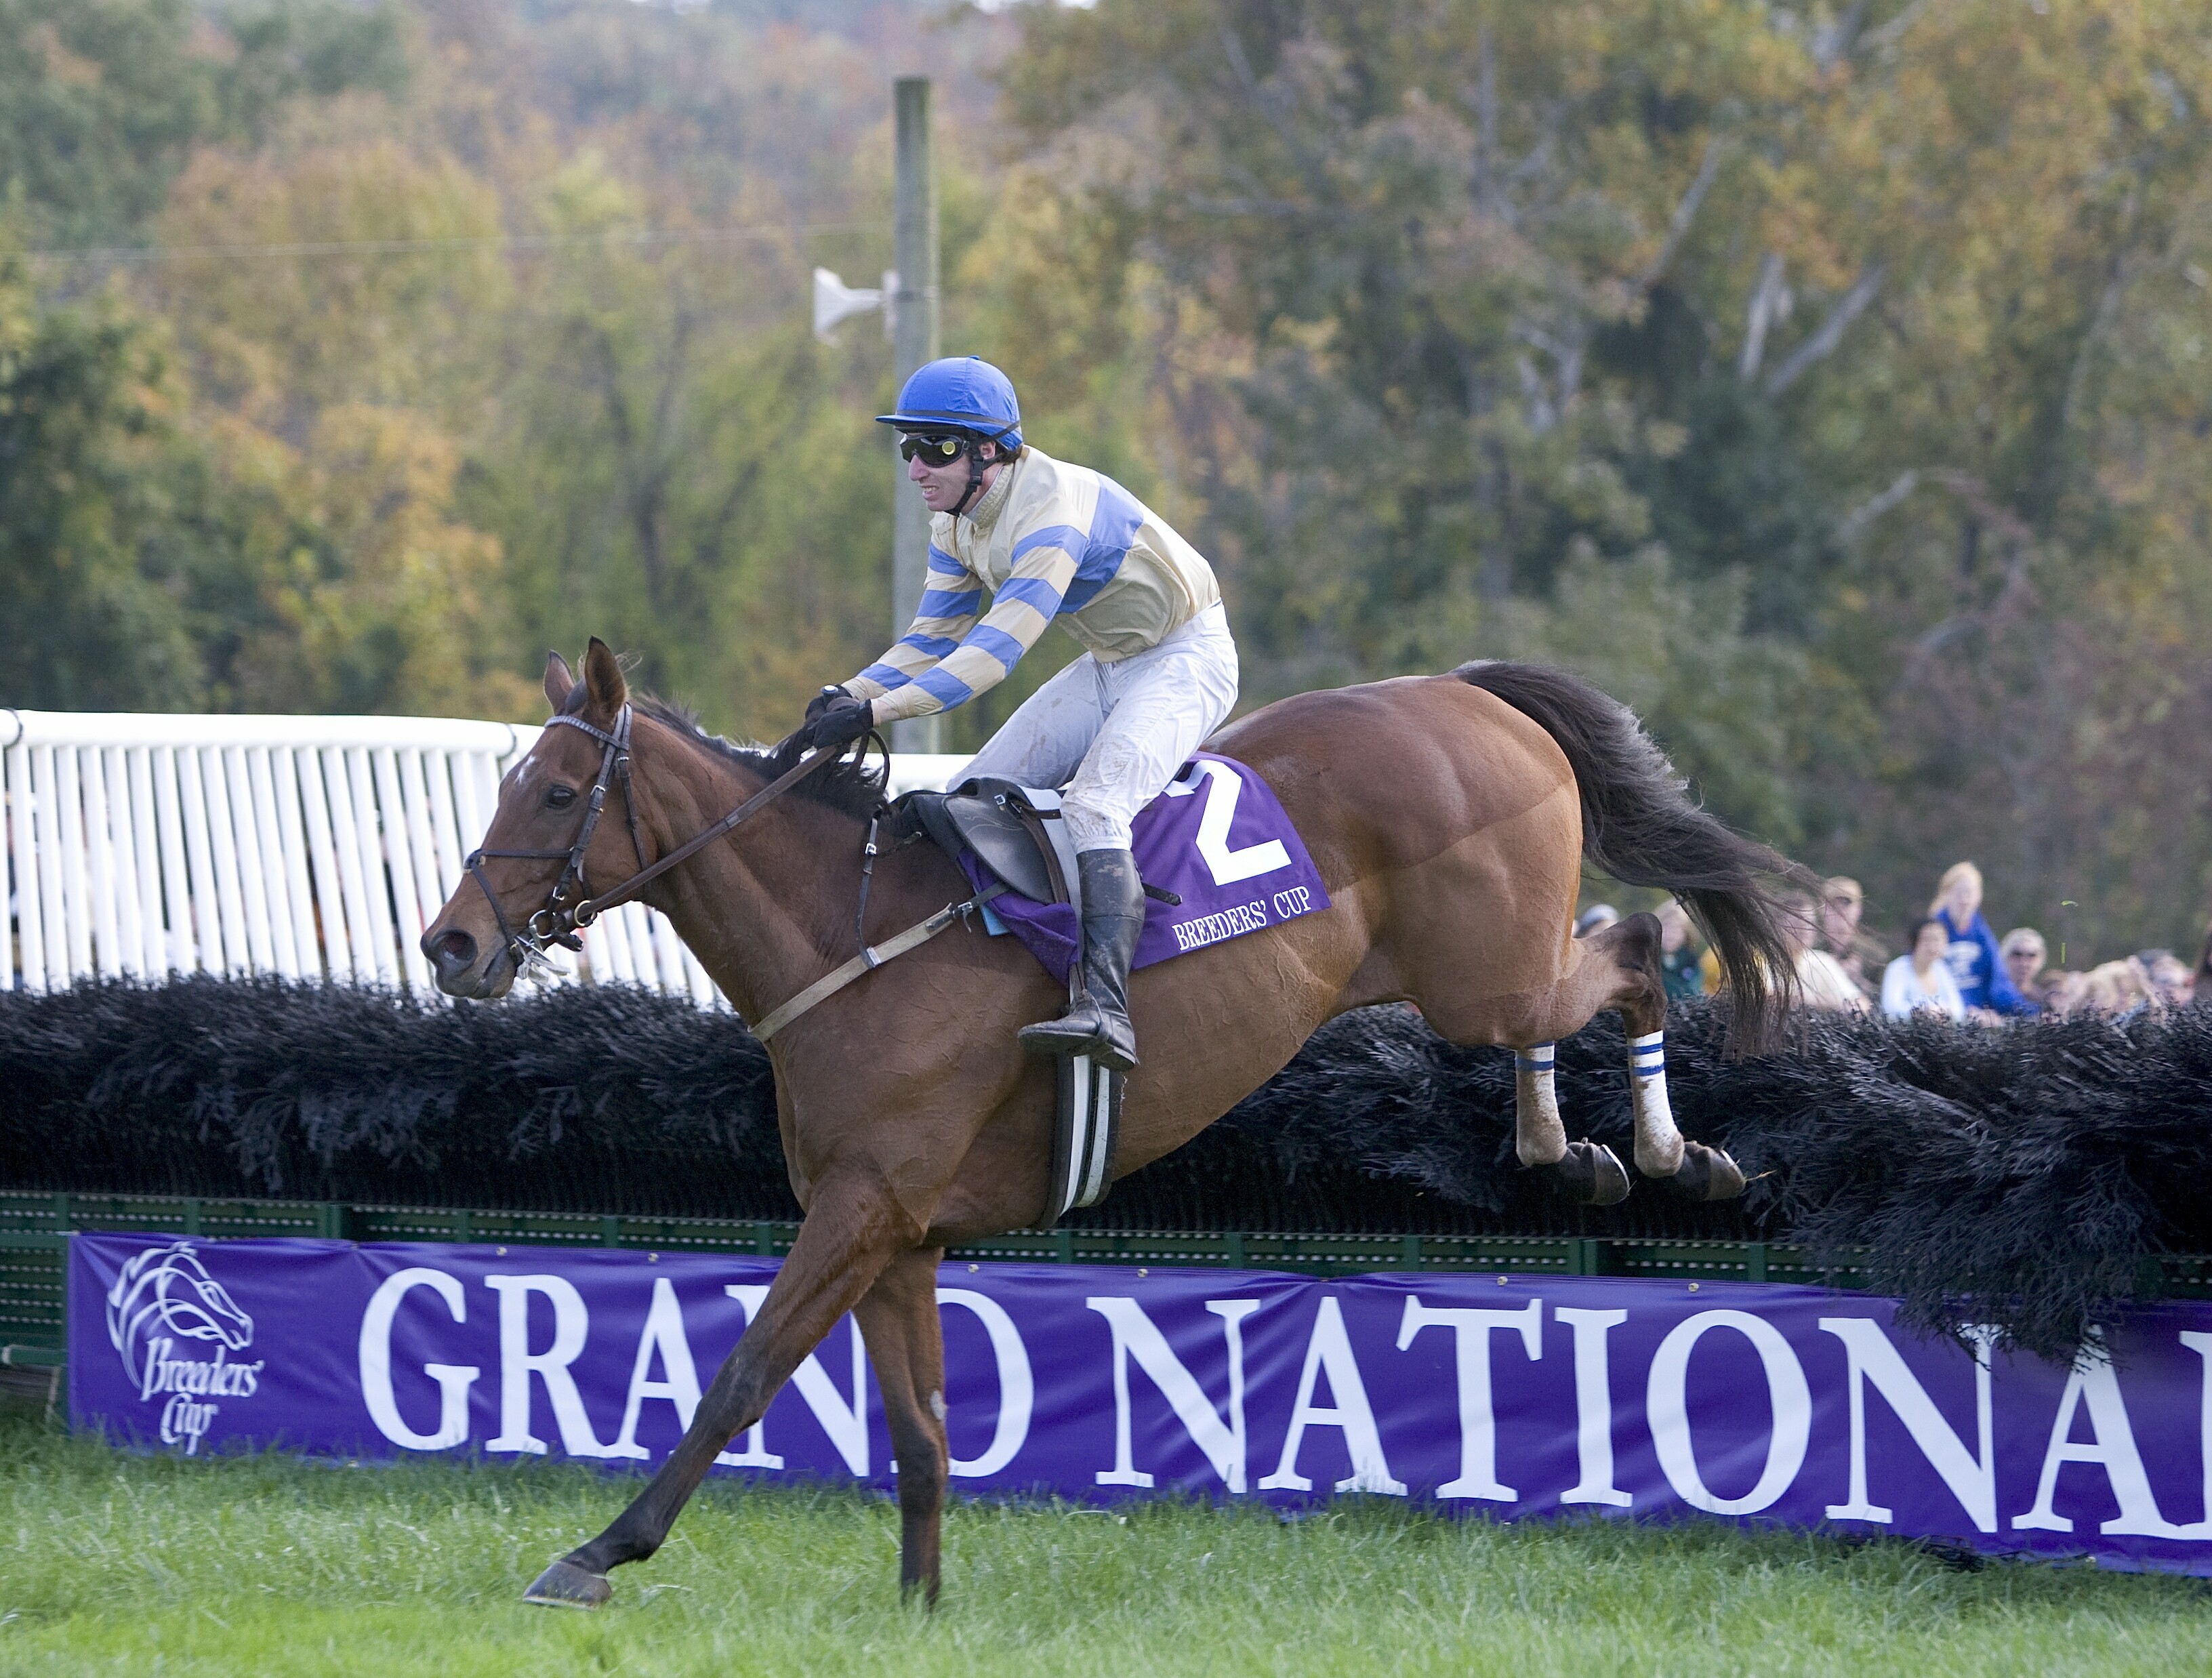 McDynamo (Jody Petty up) clears the last jump on his way to win the 2007 Grand National at Far Hills (Tod Marks)